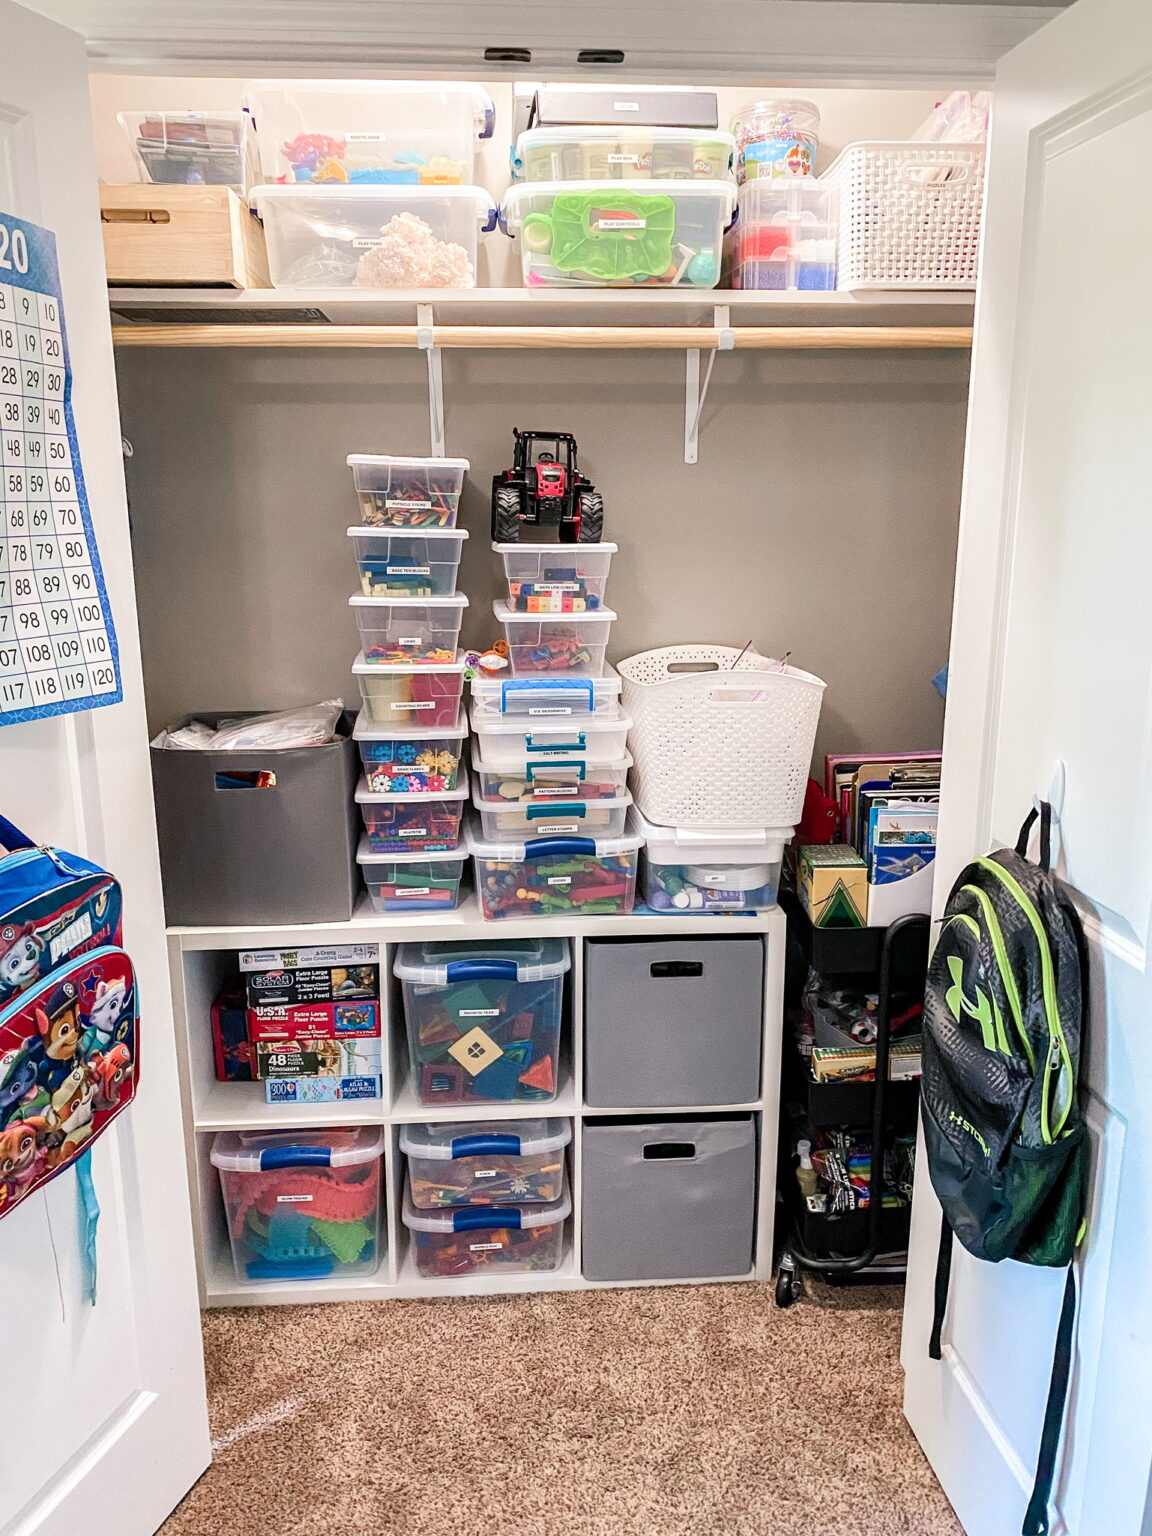 Our Homeschool Room Tour - The Simply Organized Home